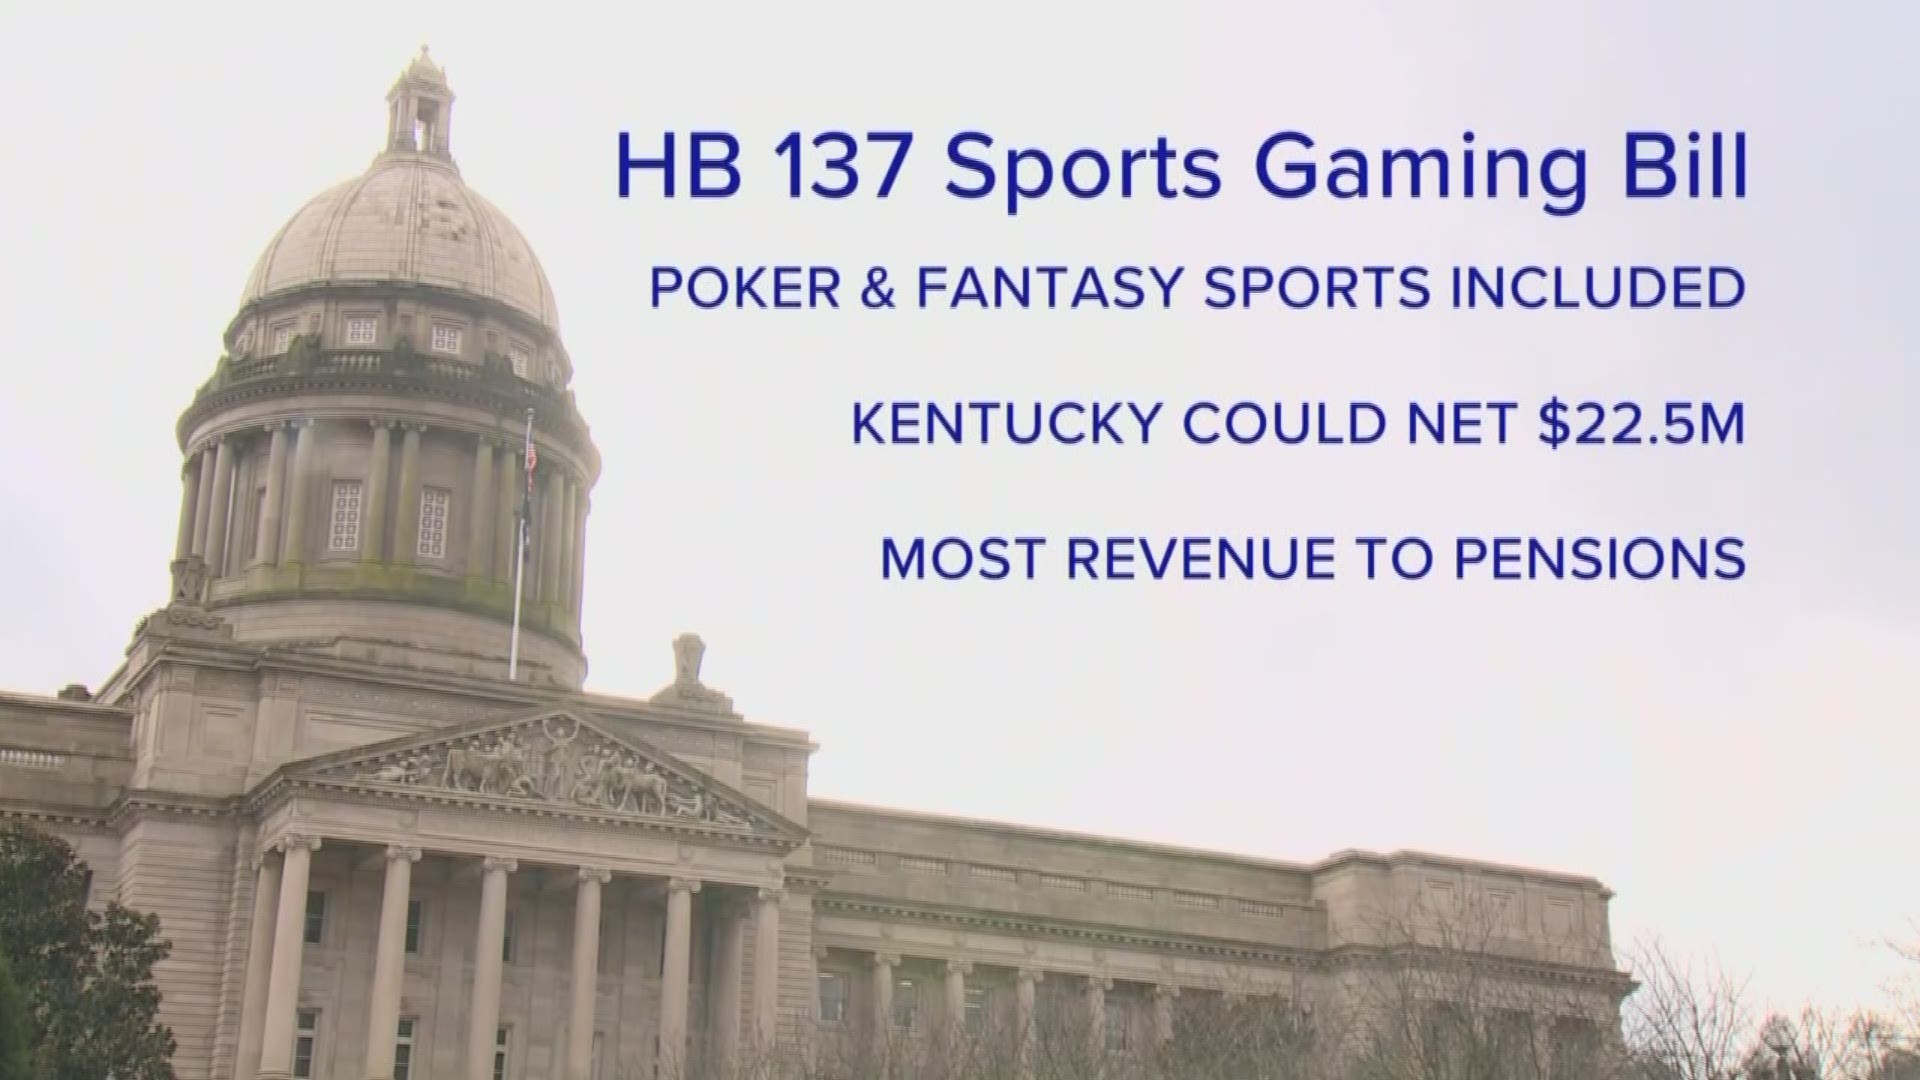 The bill will allow betting on games with in-state college teams like Louisville and Kentucky.